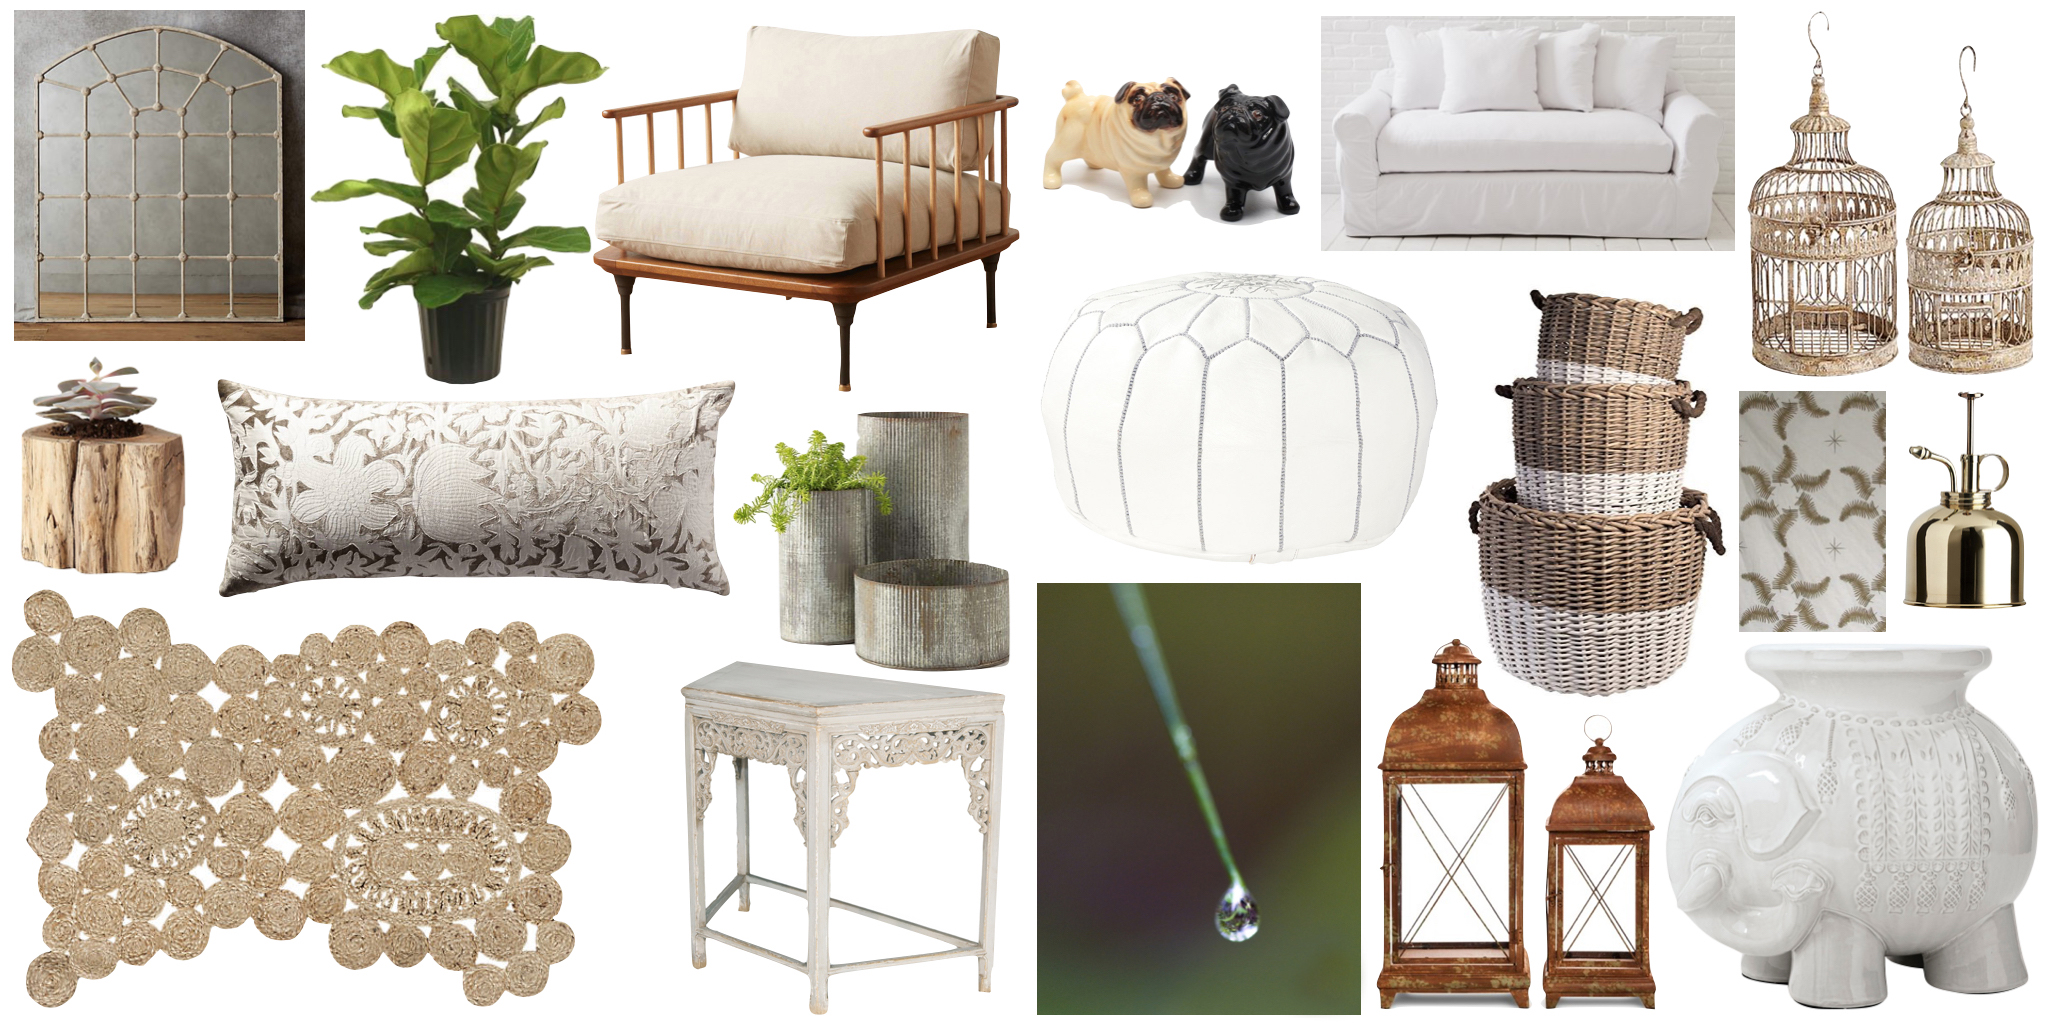 buying guide, featured image, montage, smartt, sunroom, four seasons, 4 seasons, plants, accessories, furniture, lighting, art